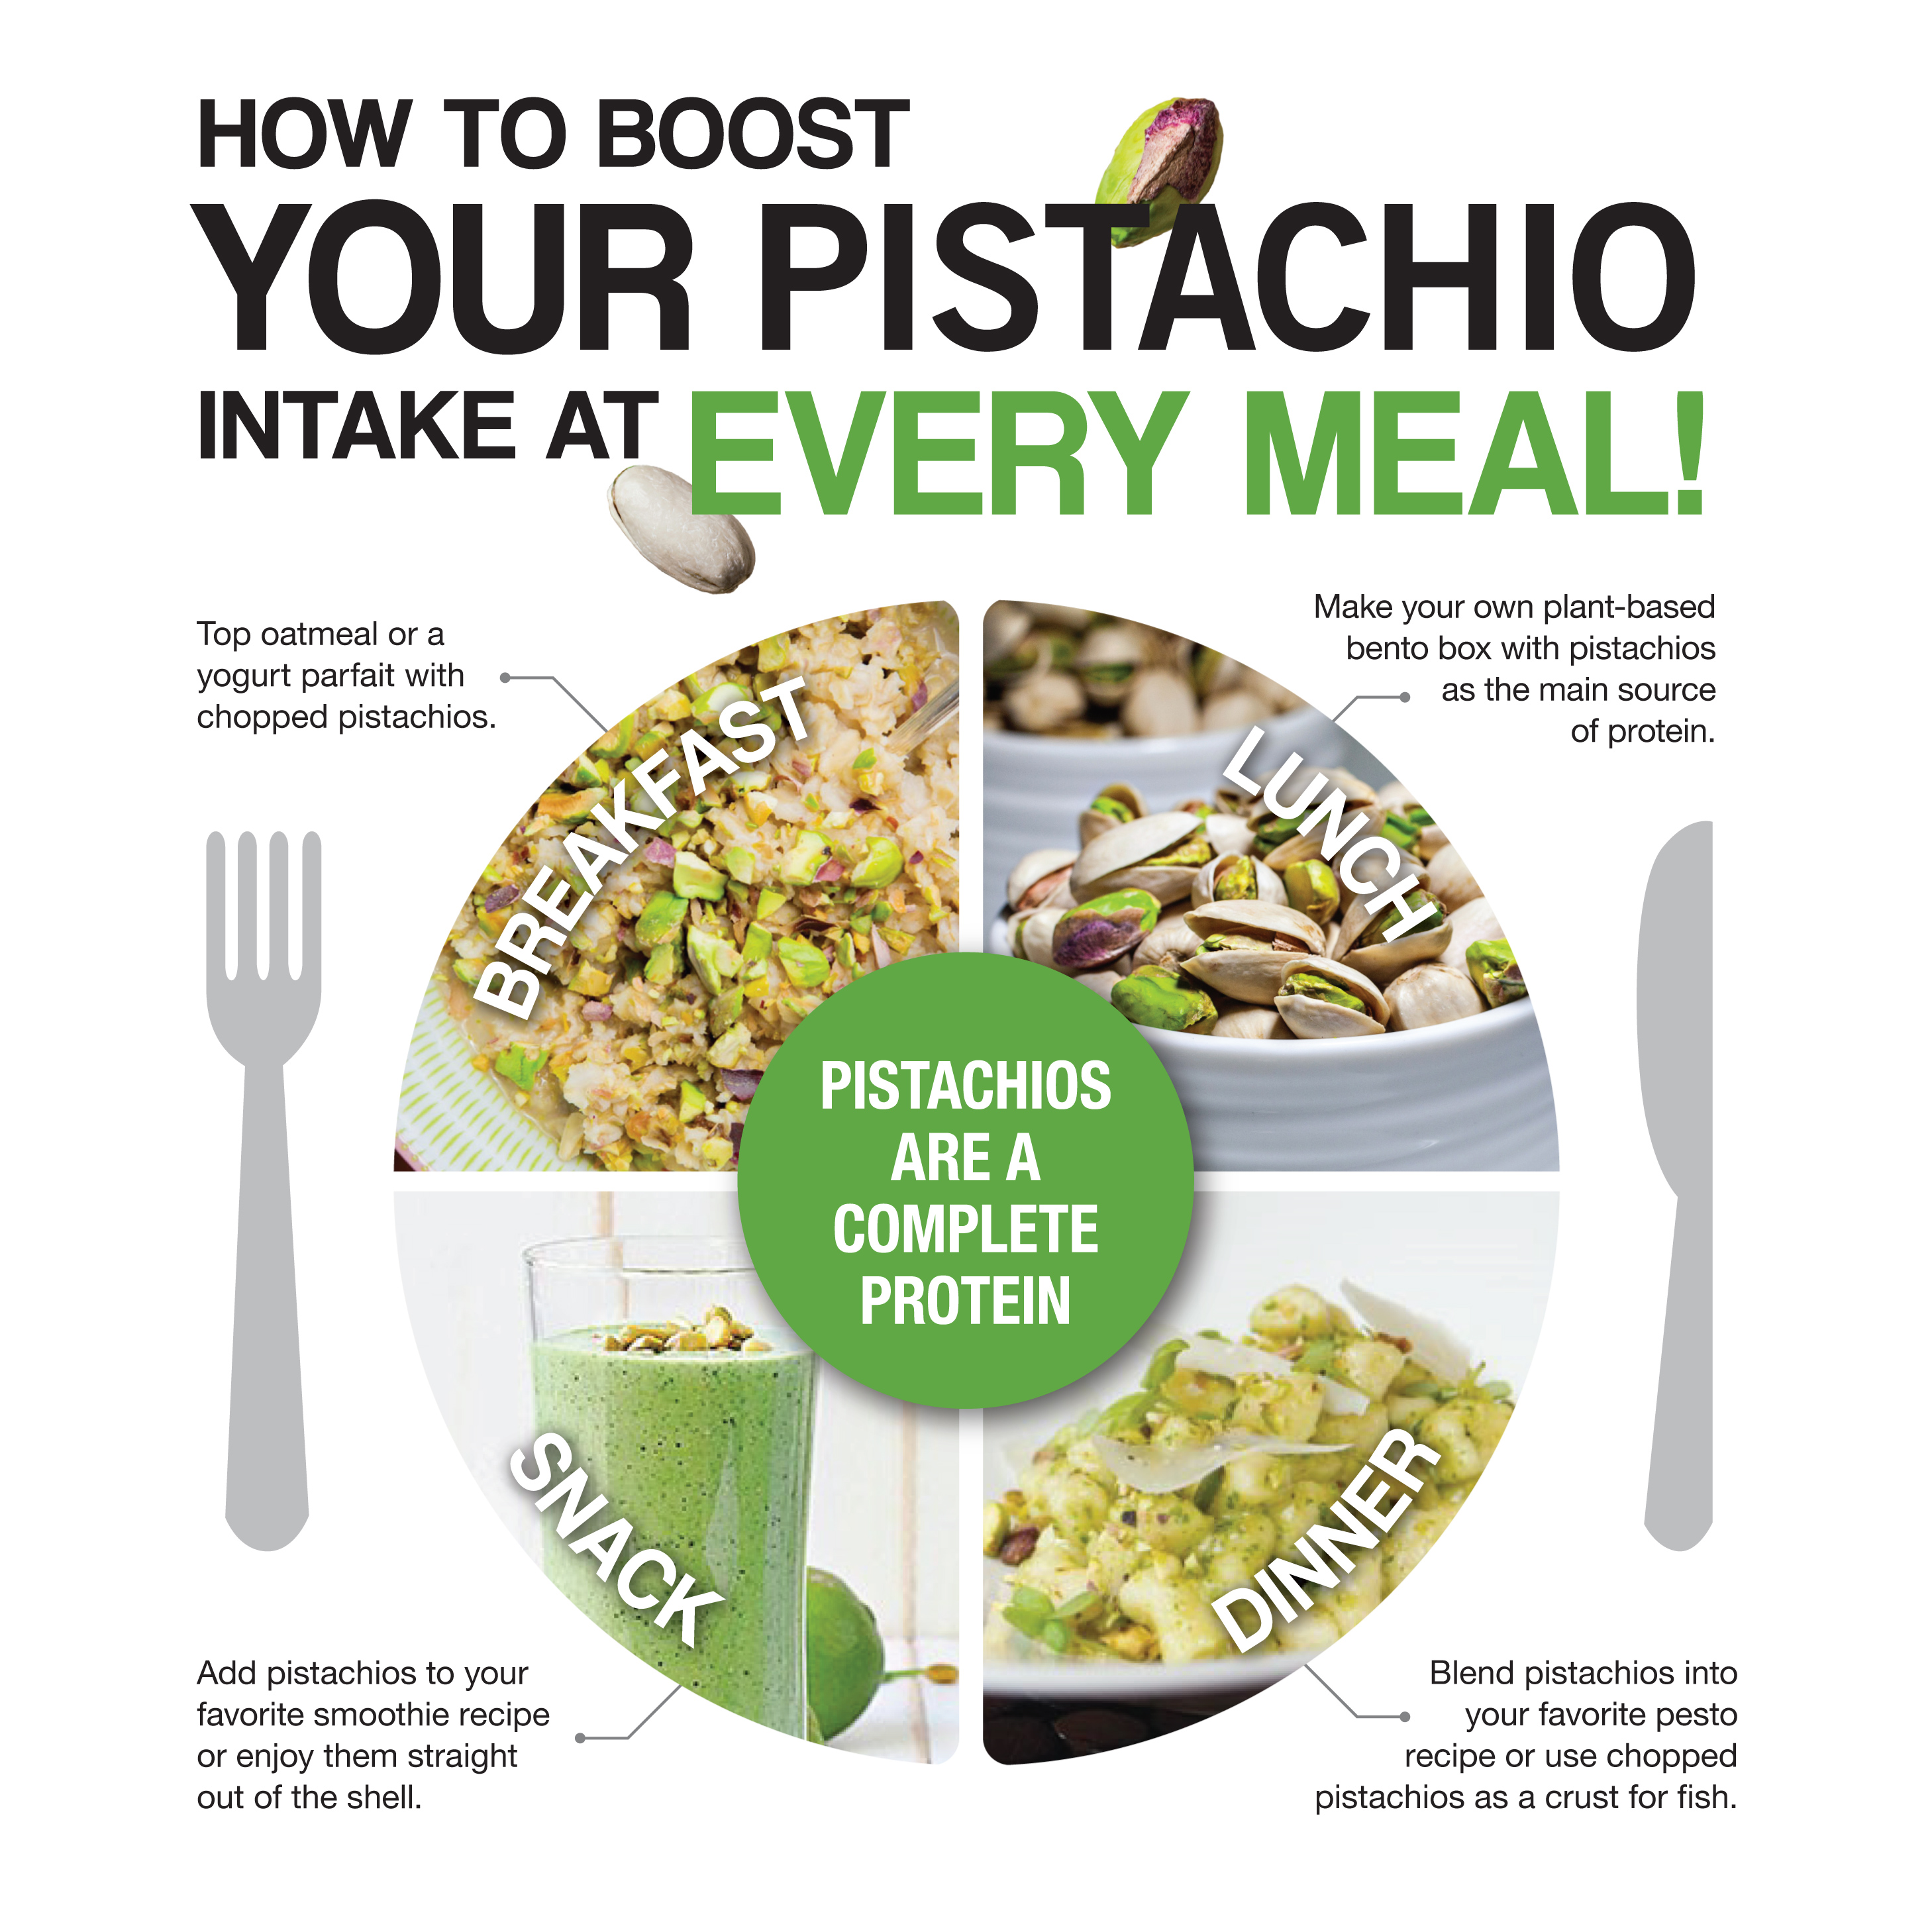 How to boost you pistachio intake at every meal!